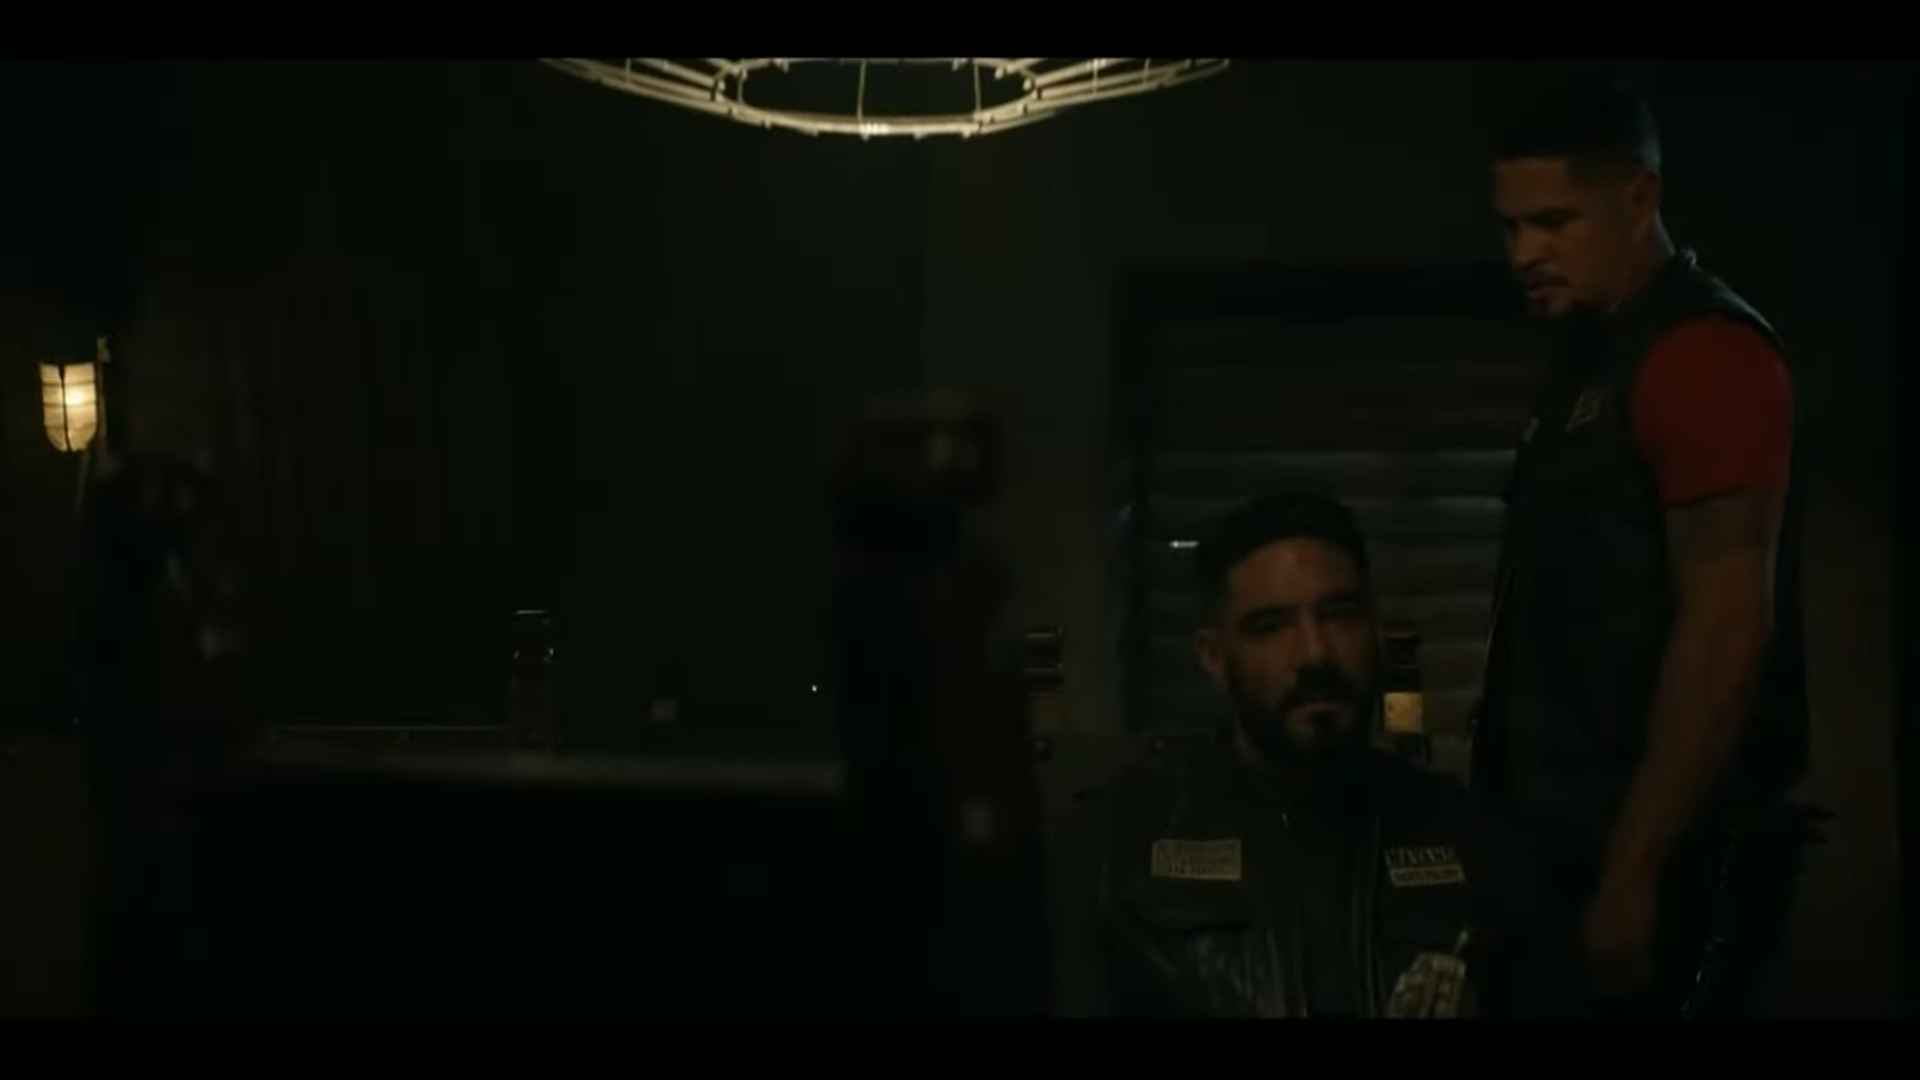 Story For Mayans M.C. Season 4 Episode 10